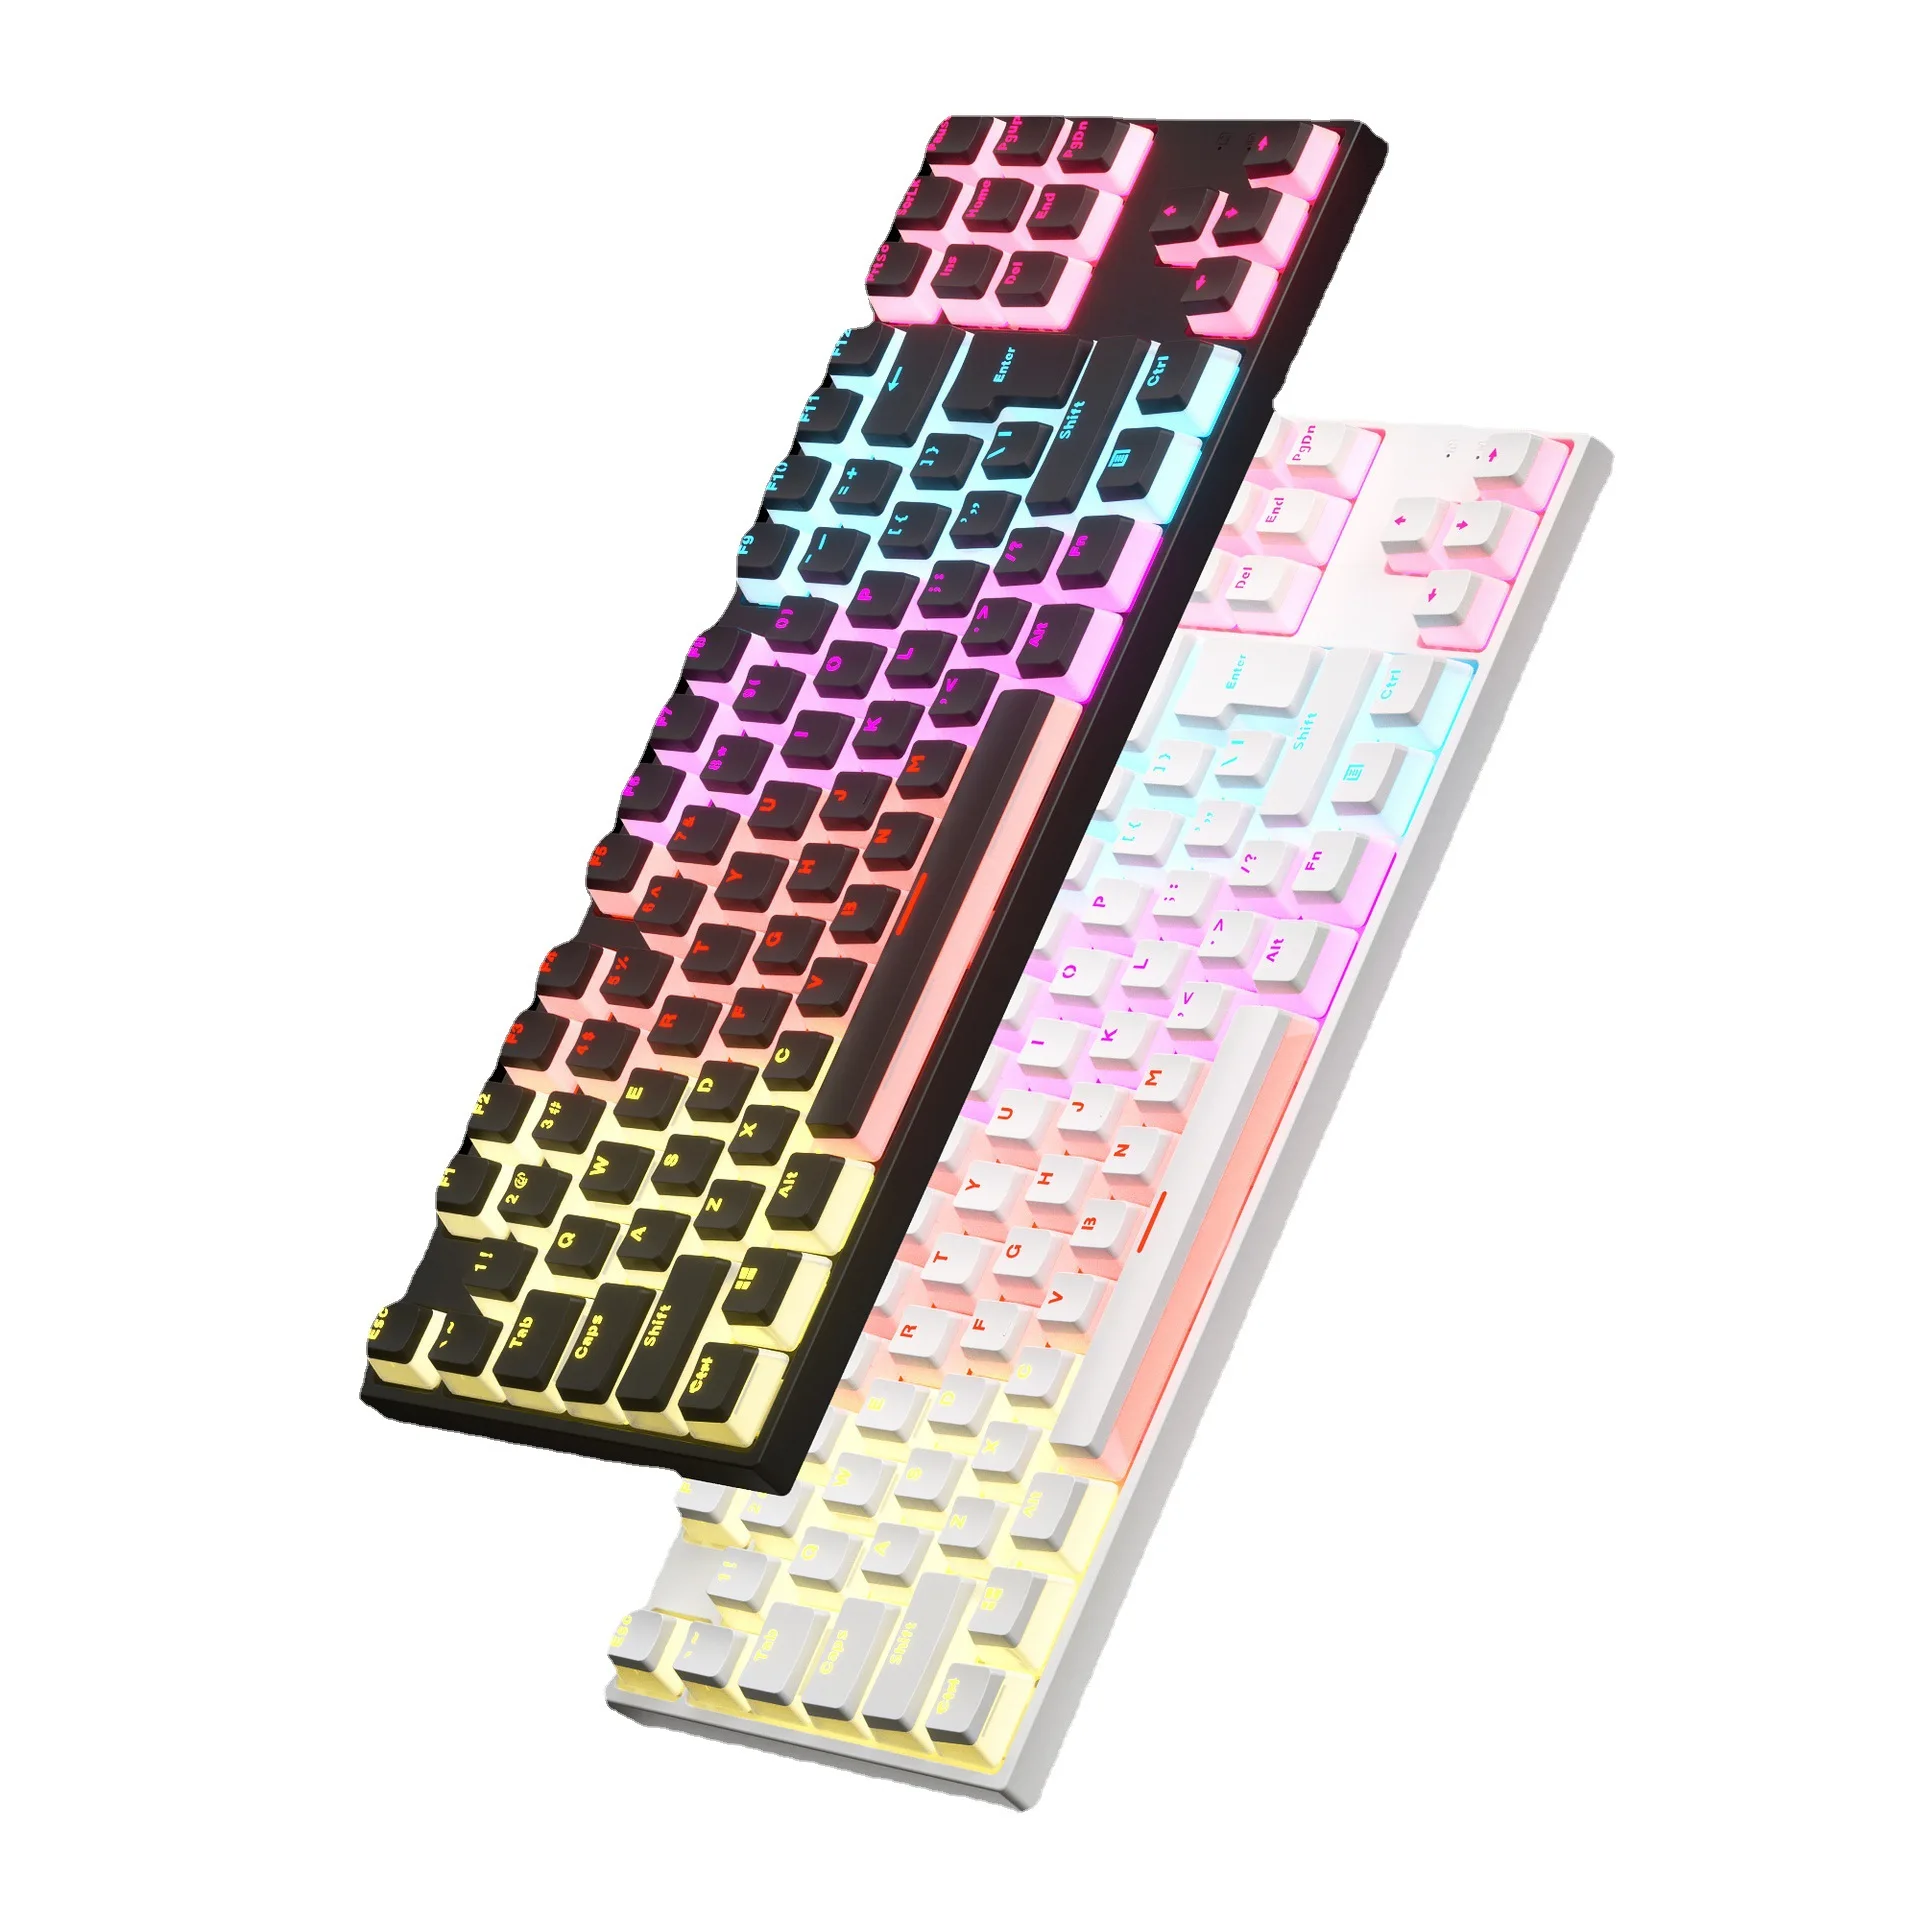 

87 Keys Gaming Wired Mechanical Keyboard Pudding Keycap Blue Switch RGB Backlit Teclado Gamer for PC Laptop